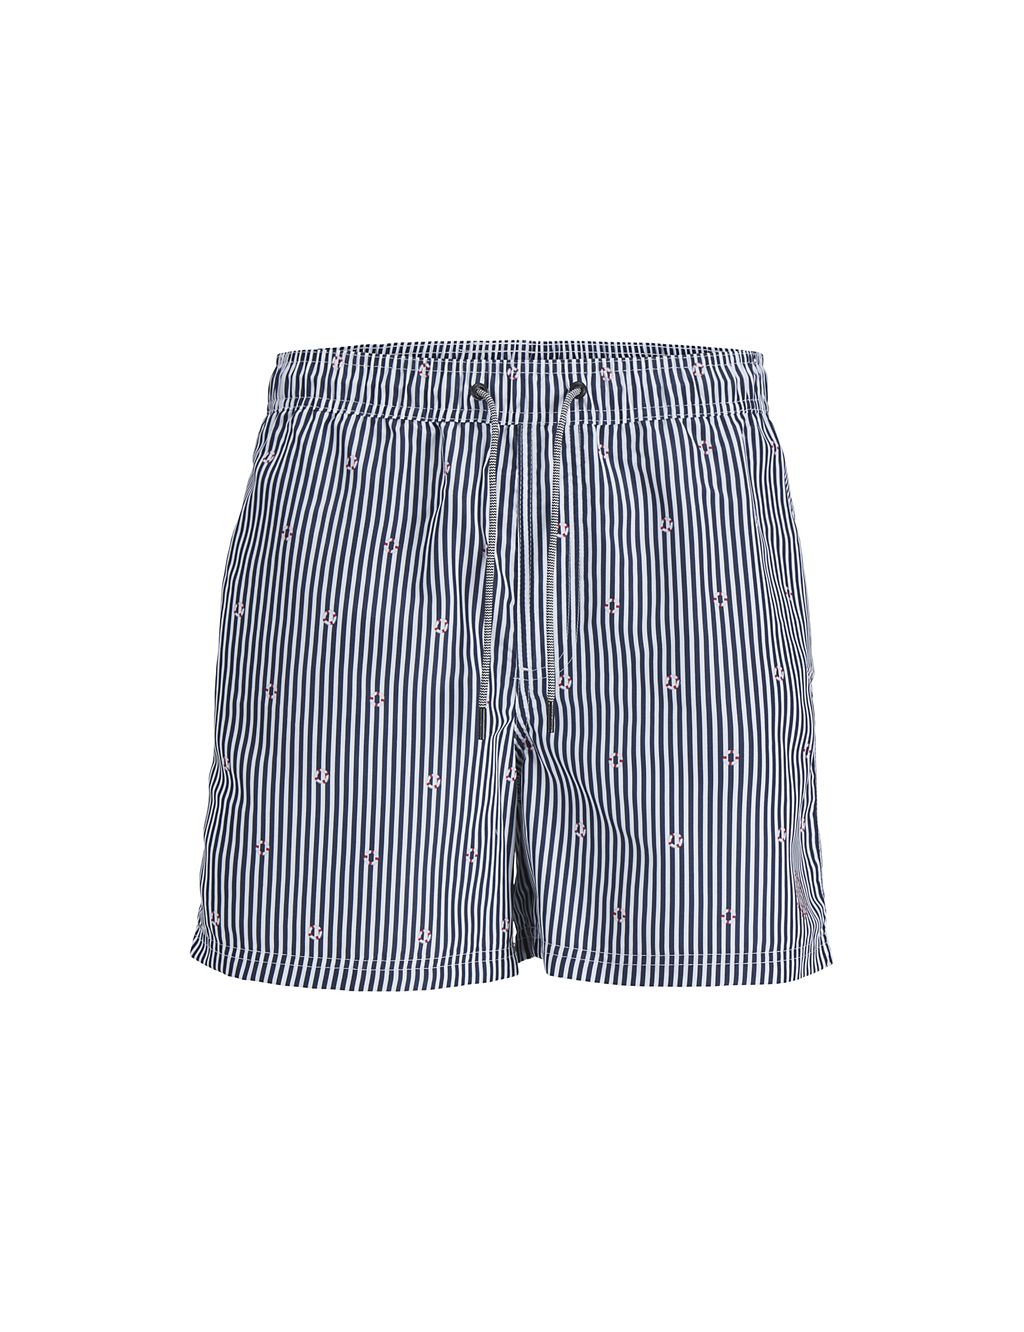 Striped Embroidered Swim Shorts 1 of 6